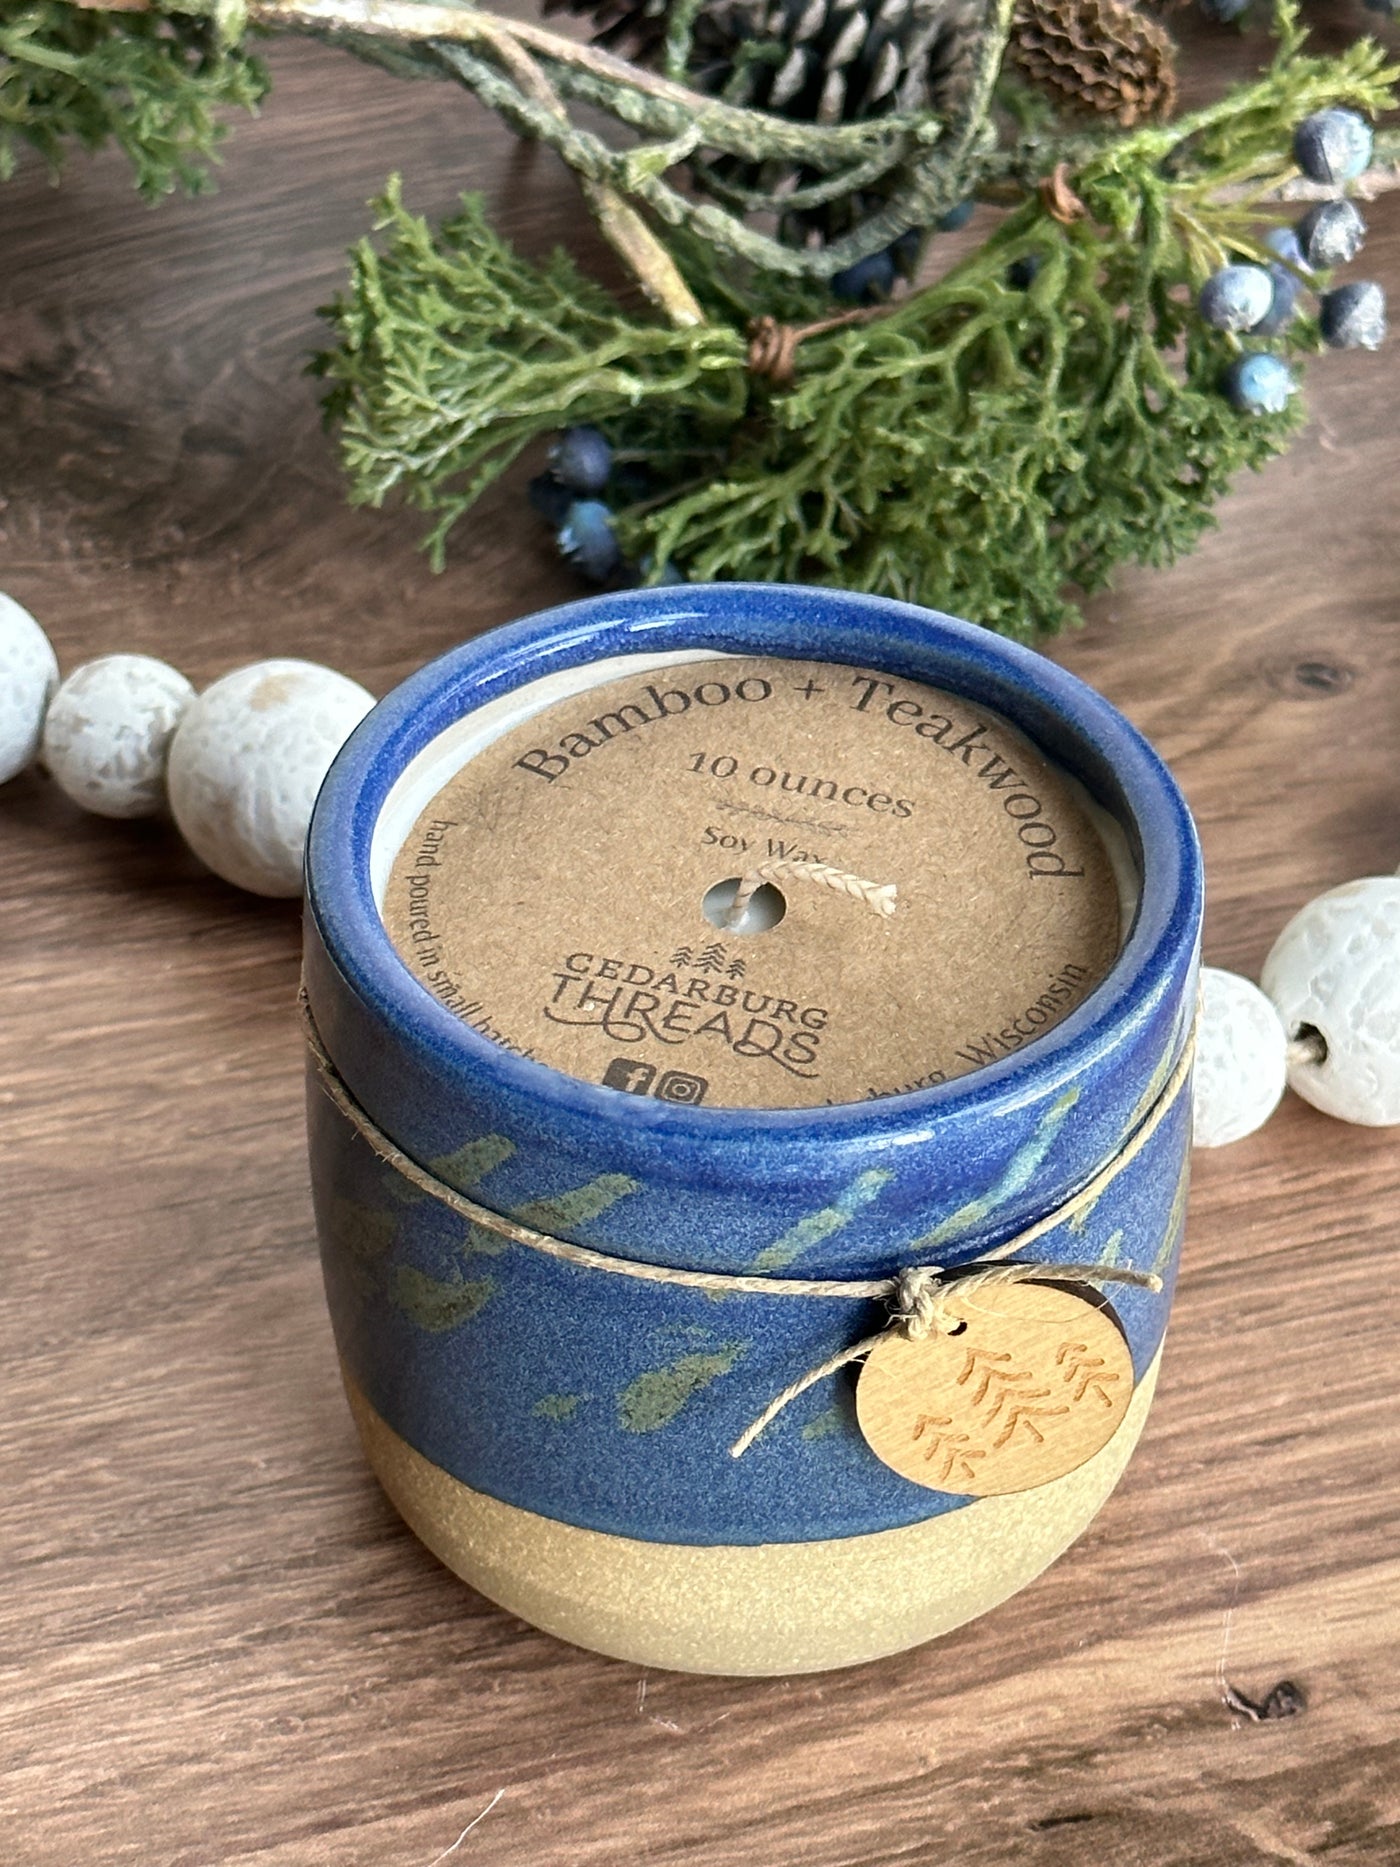 10 oz Bamboo & Teakwood soy candle in blue ceramic vessel